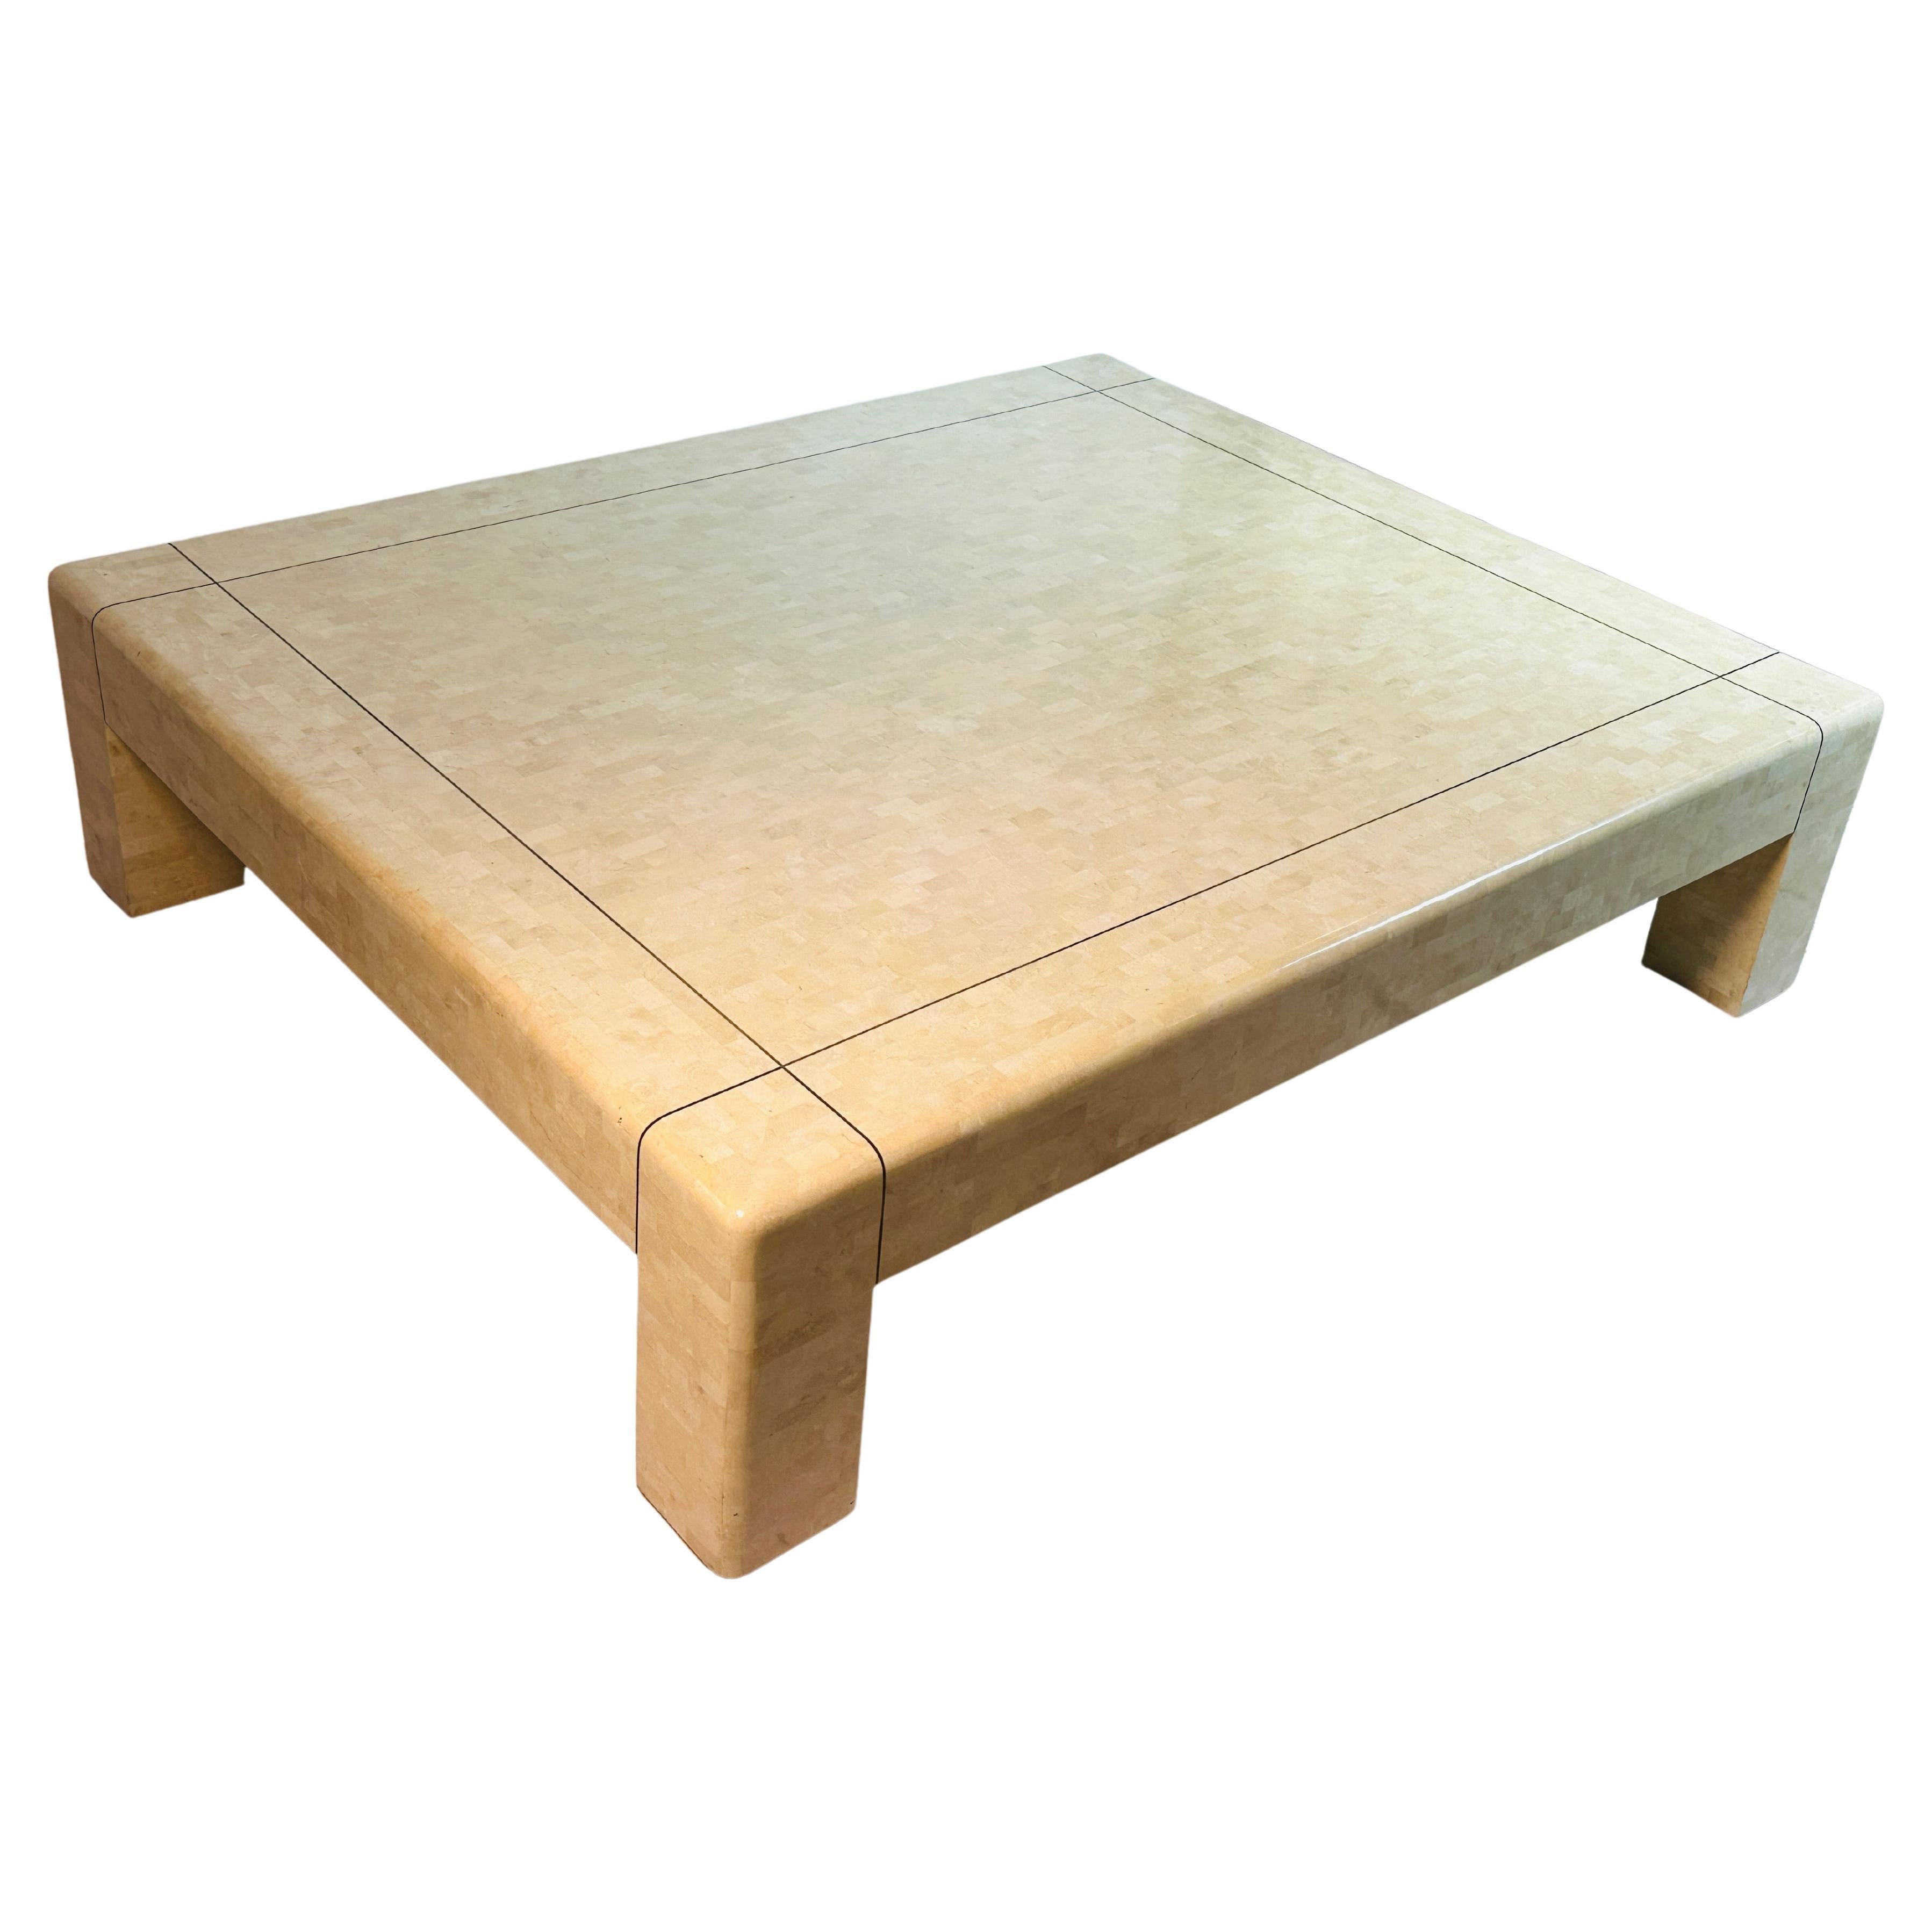 Philippine Monumental Coffee Table in Tessellated Stone & Brass by Karl Springer, Signed For Sale